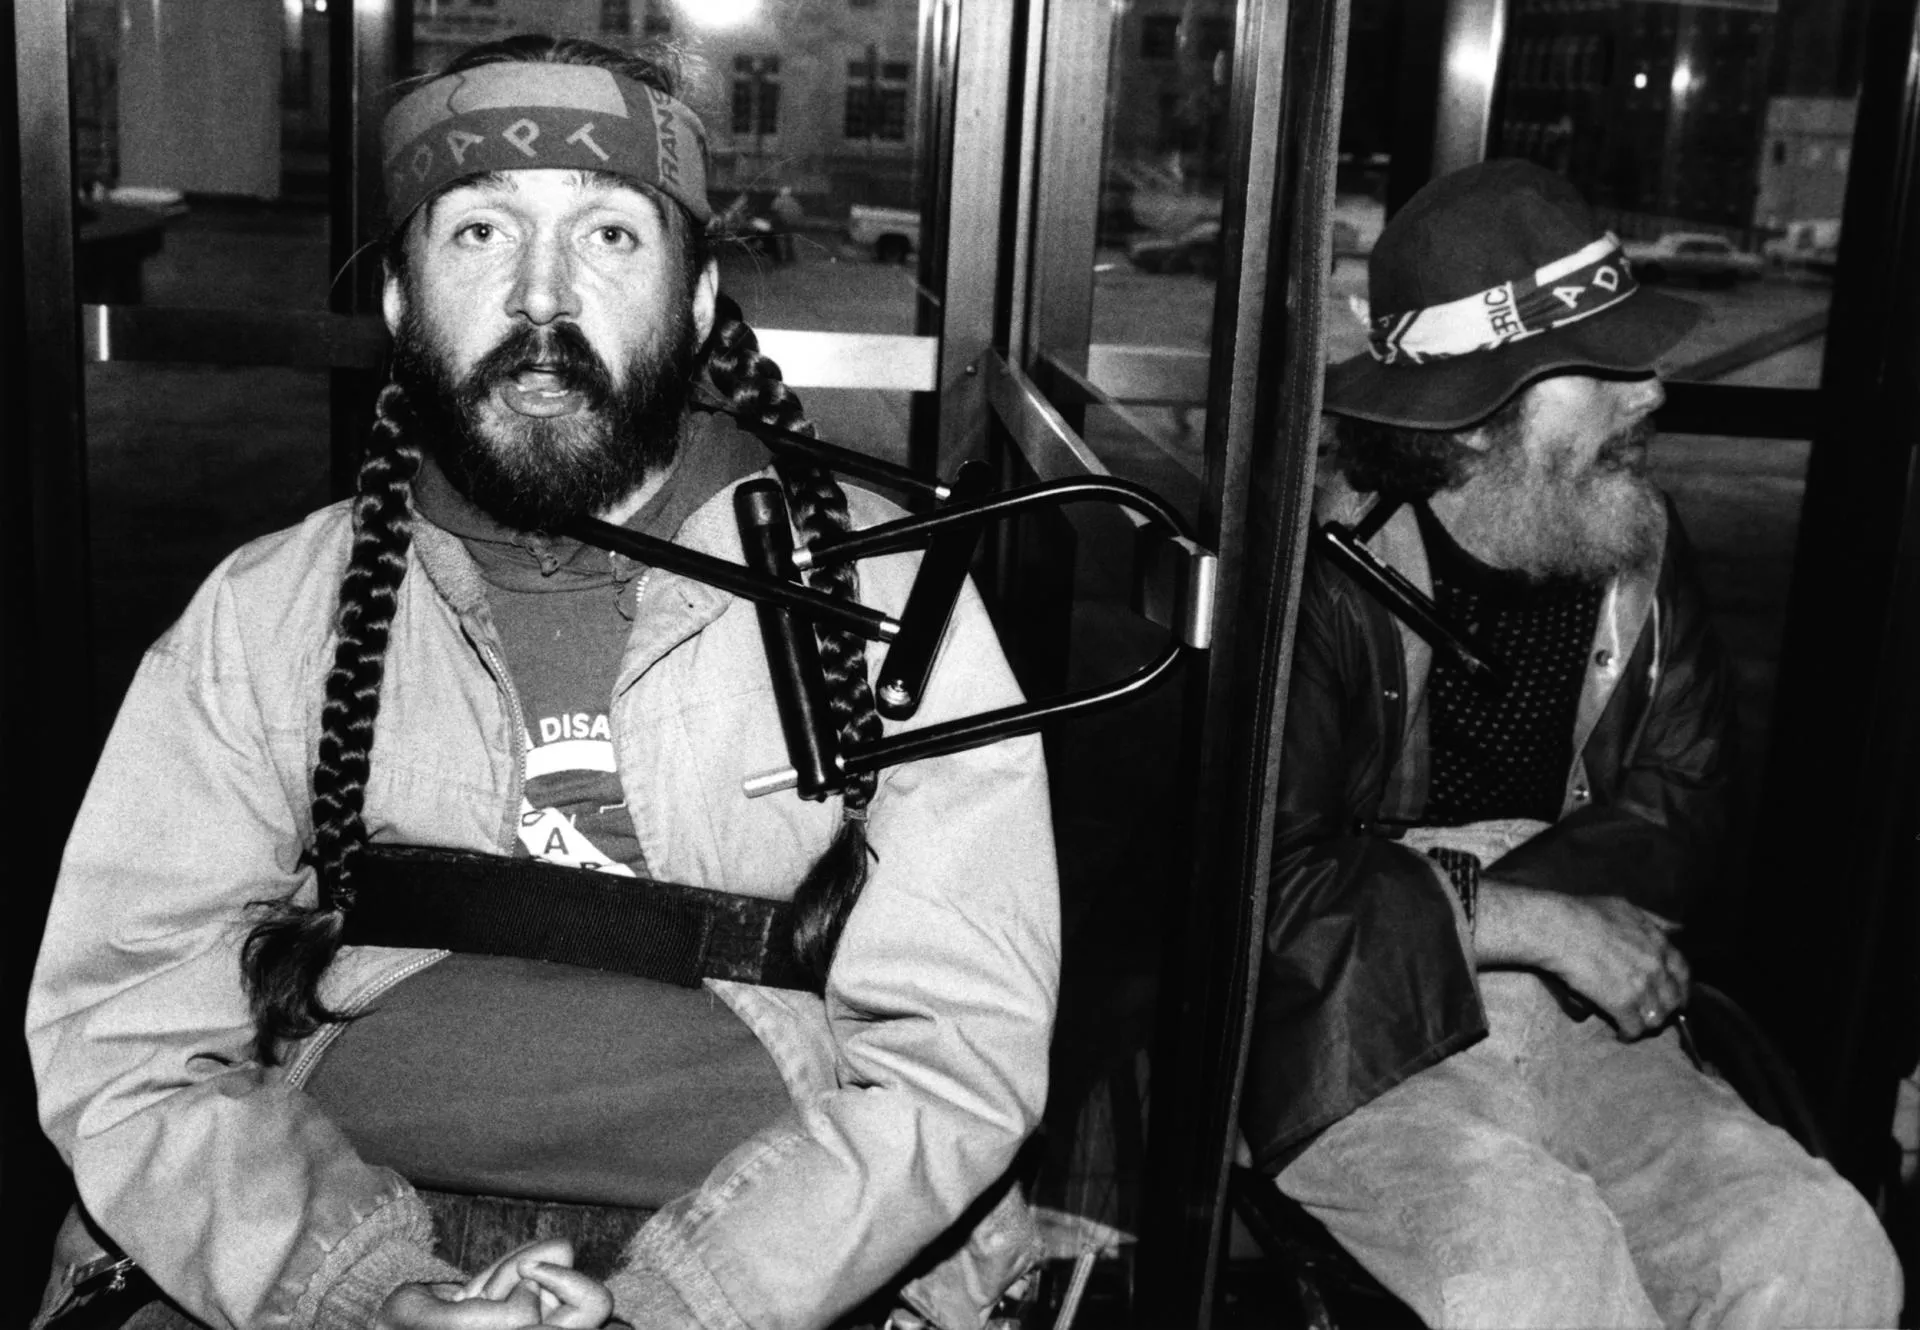 ADAPT in Los Angeles, Mike Auberger and Bob Kafka chained by the neck to a revolving door.